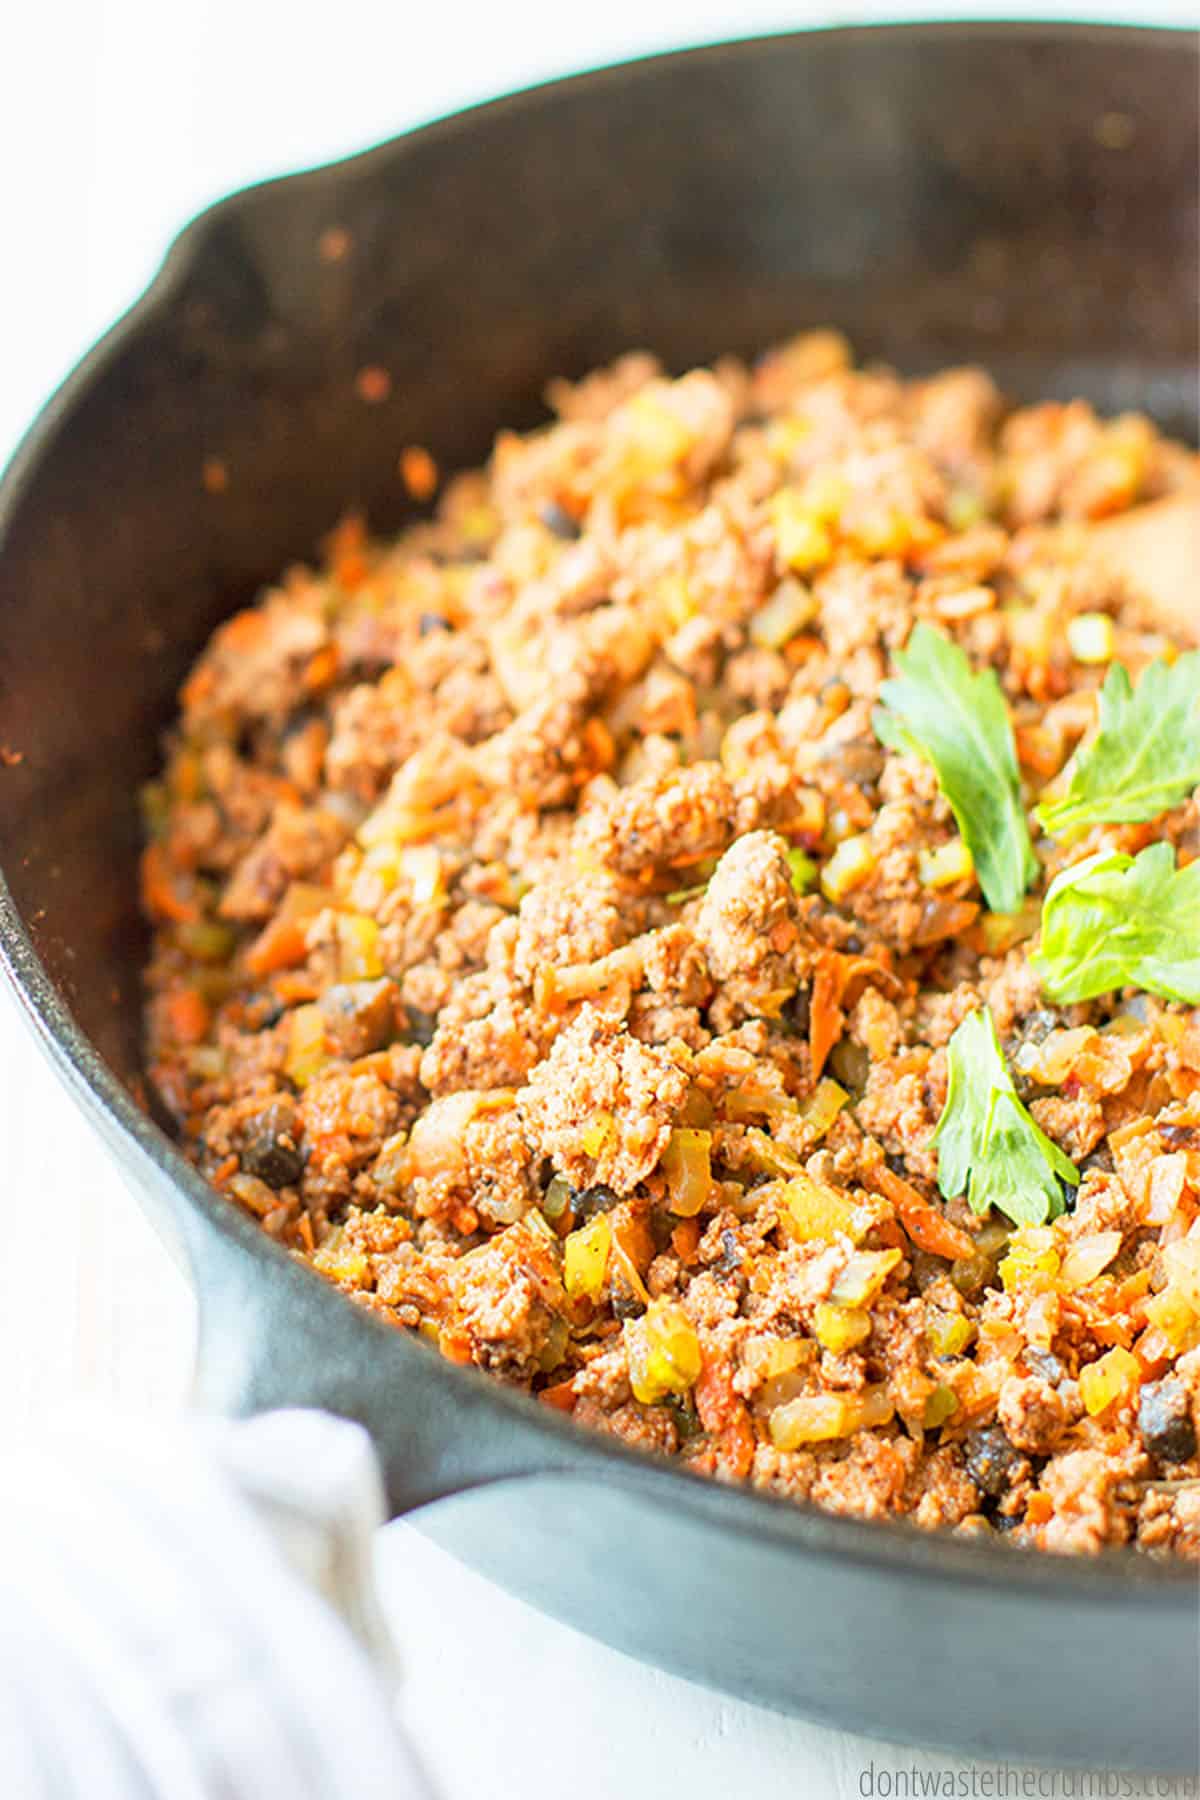 Ground beef taco meat in a cast iron skillet